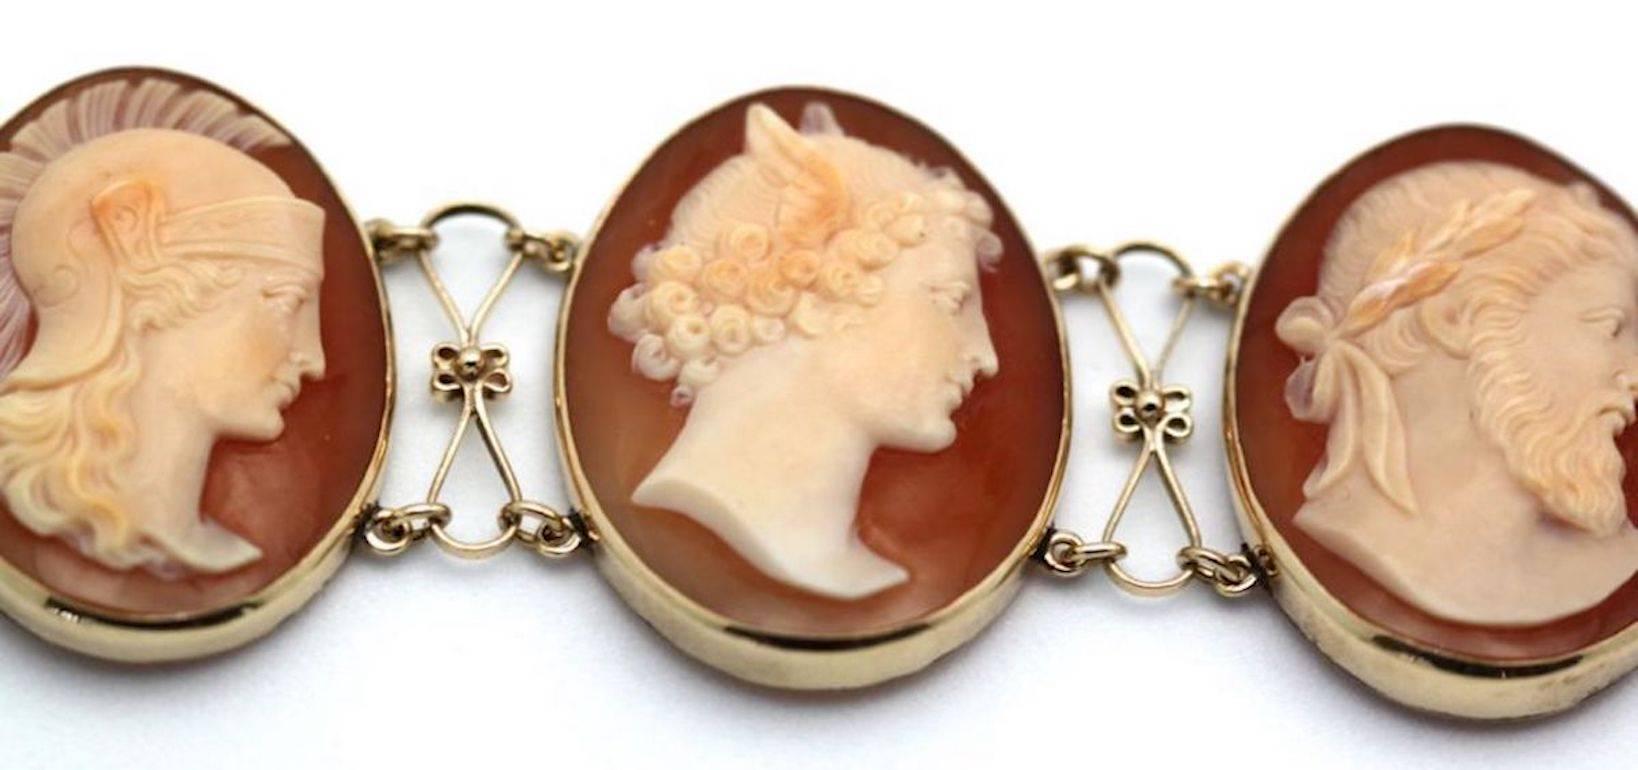 This listing is for a very fine carved Cameo Greek Mythology Bracelet.  The Cameo's depict Apollo- God of Music Dance and Poetry, Posedon-God of the Sea, Aphodite- Goddess of Love, Dionysus- God of Wine, Hermes- God of travel and Roadways, etc.  The